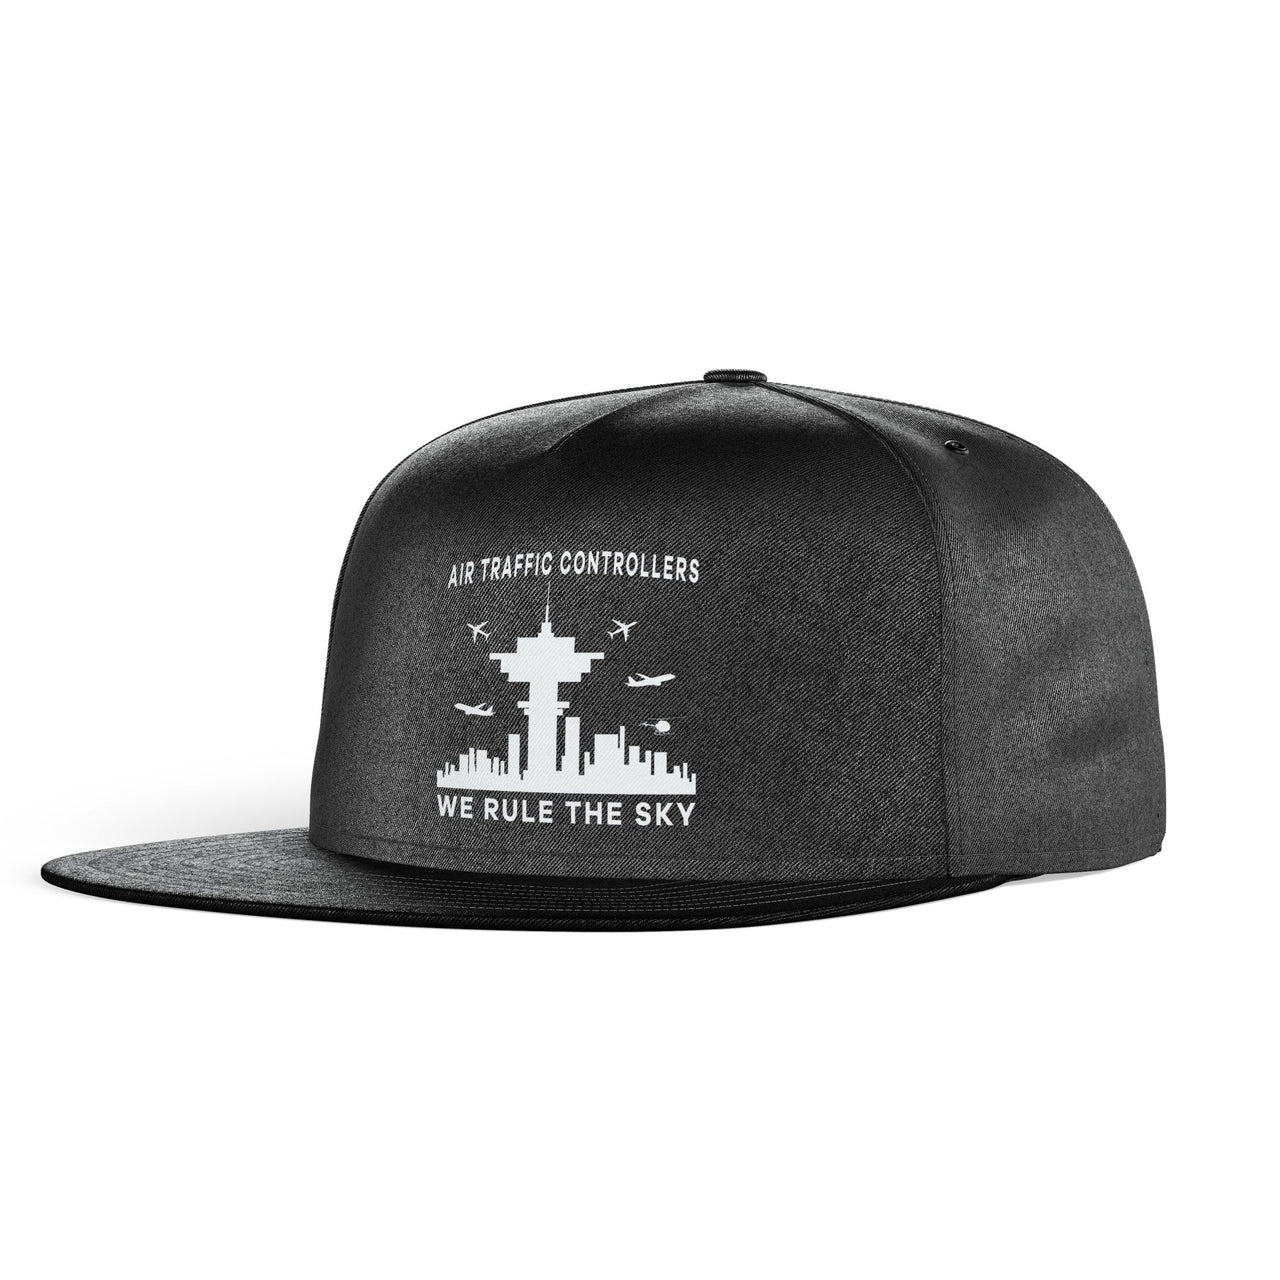 Air Traffic Controllers - We Rule The Sky Designed Snapback Caps & Hats